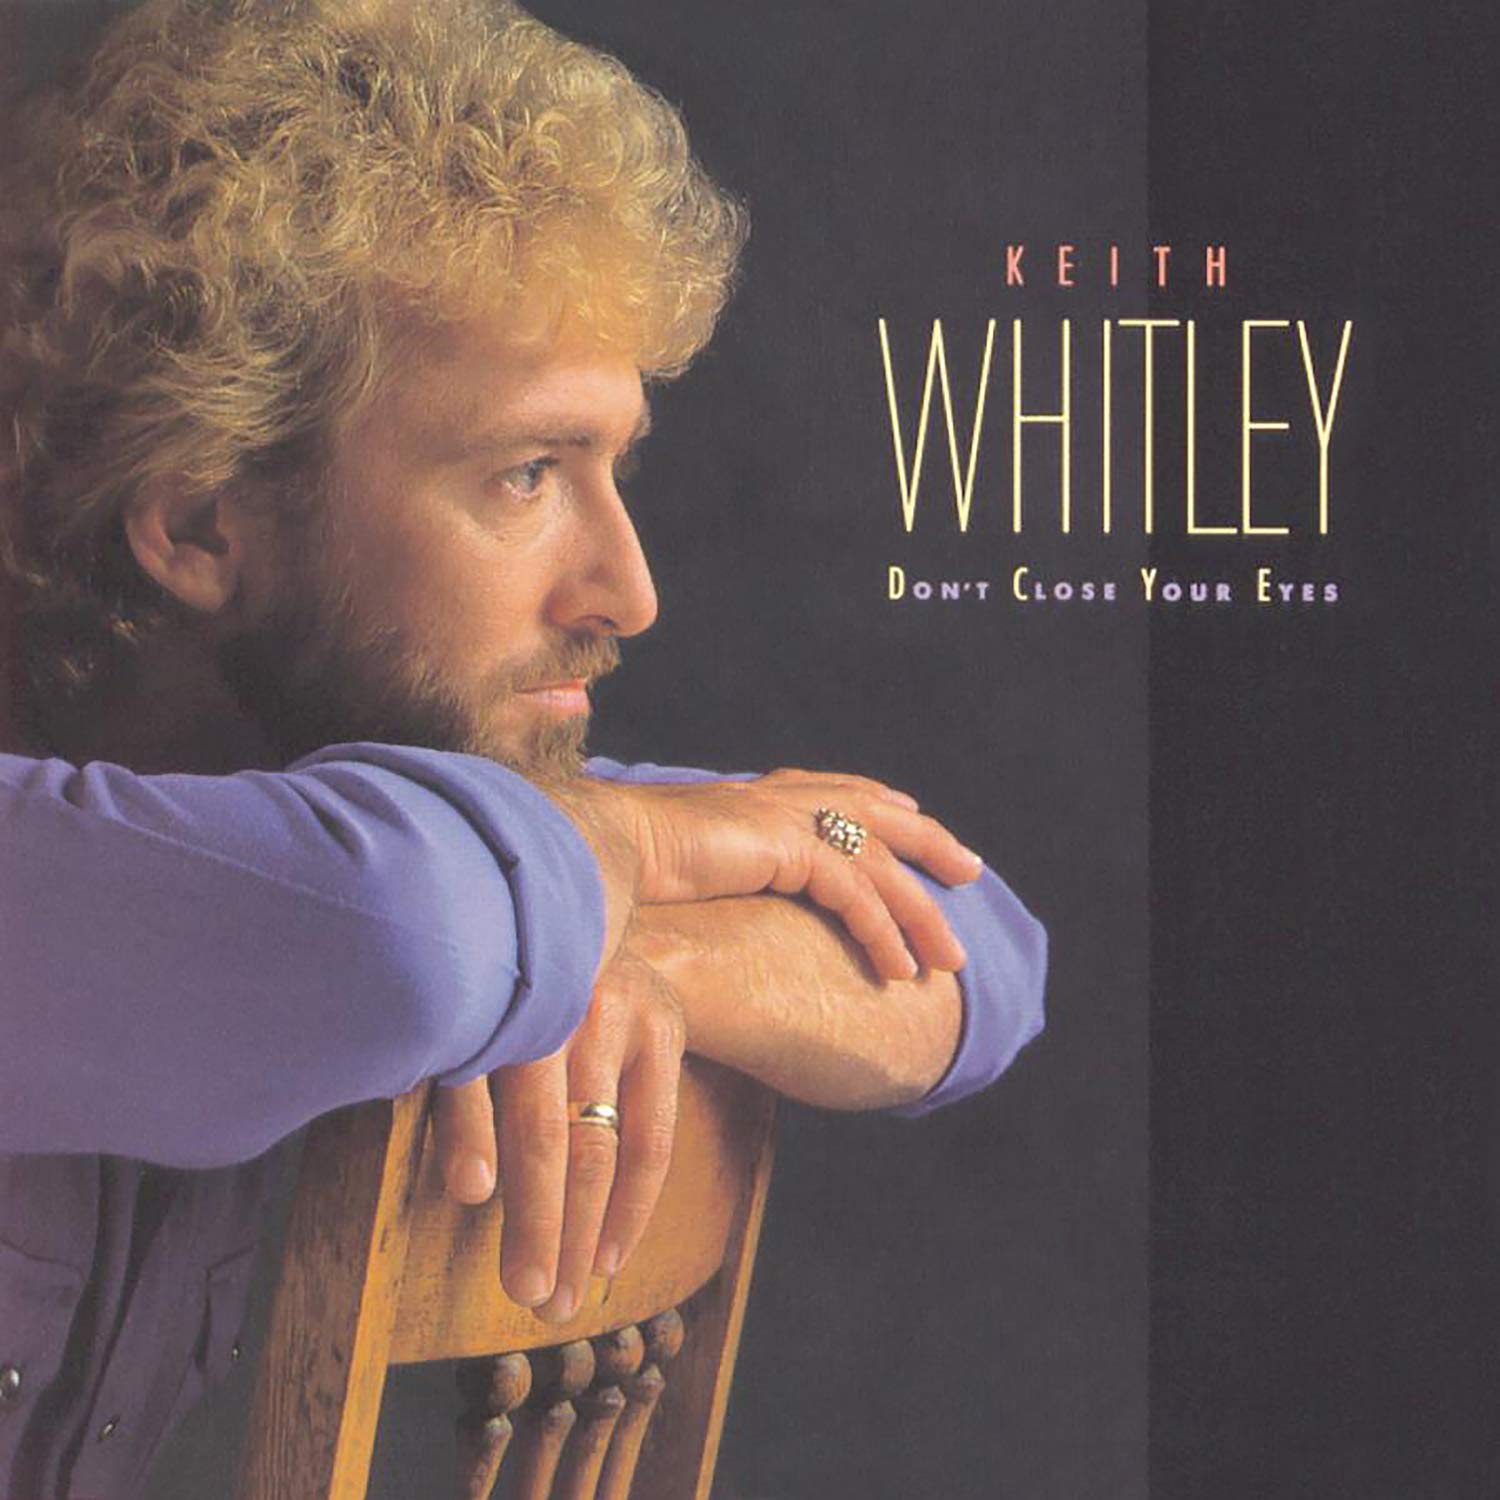 Keith Whitley &#8216;Don&#8217;t Close Your Eyes&#8217; Colored LP At Vinyl Me, Please